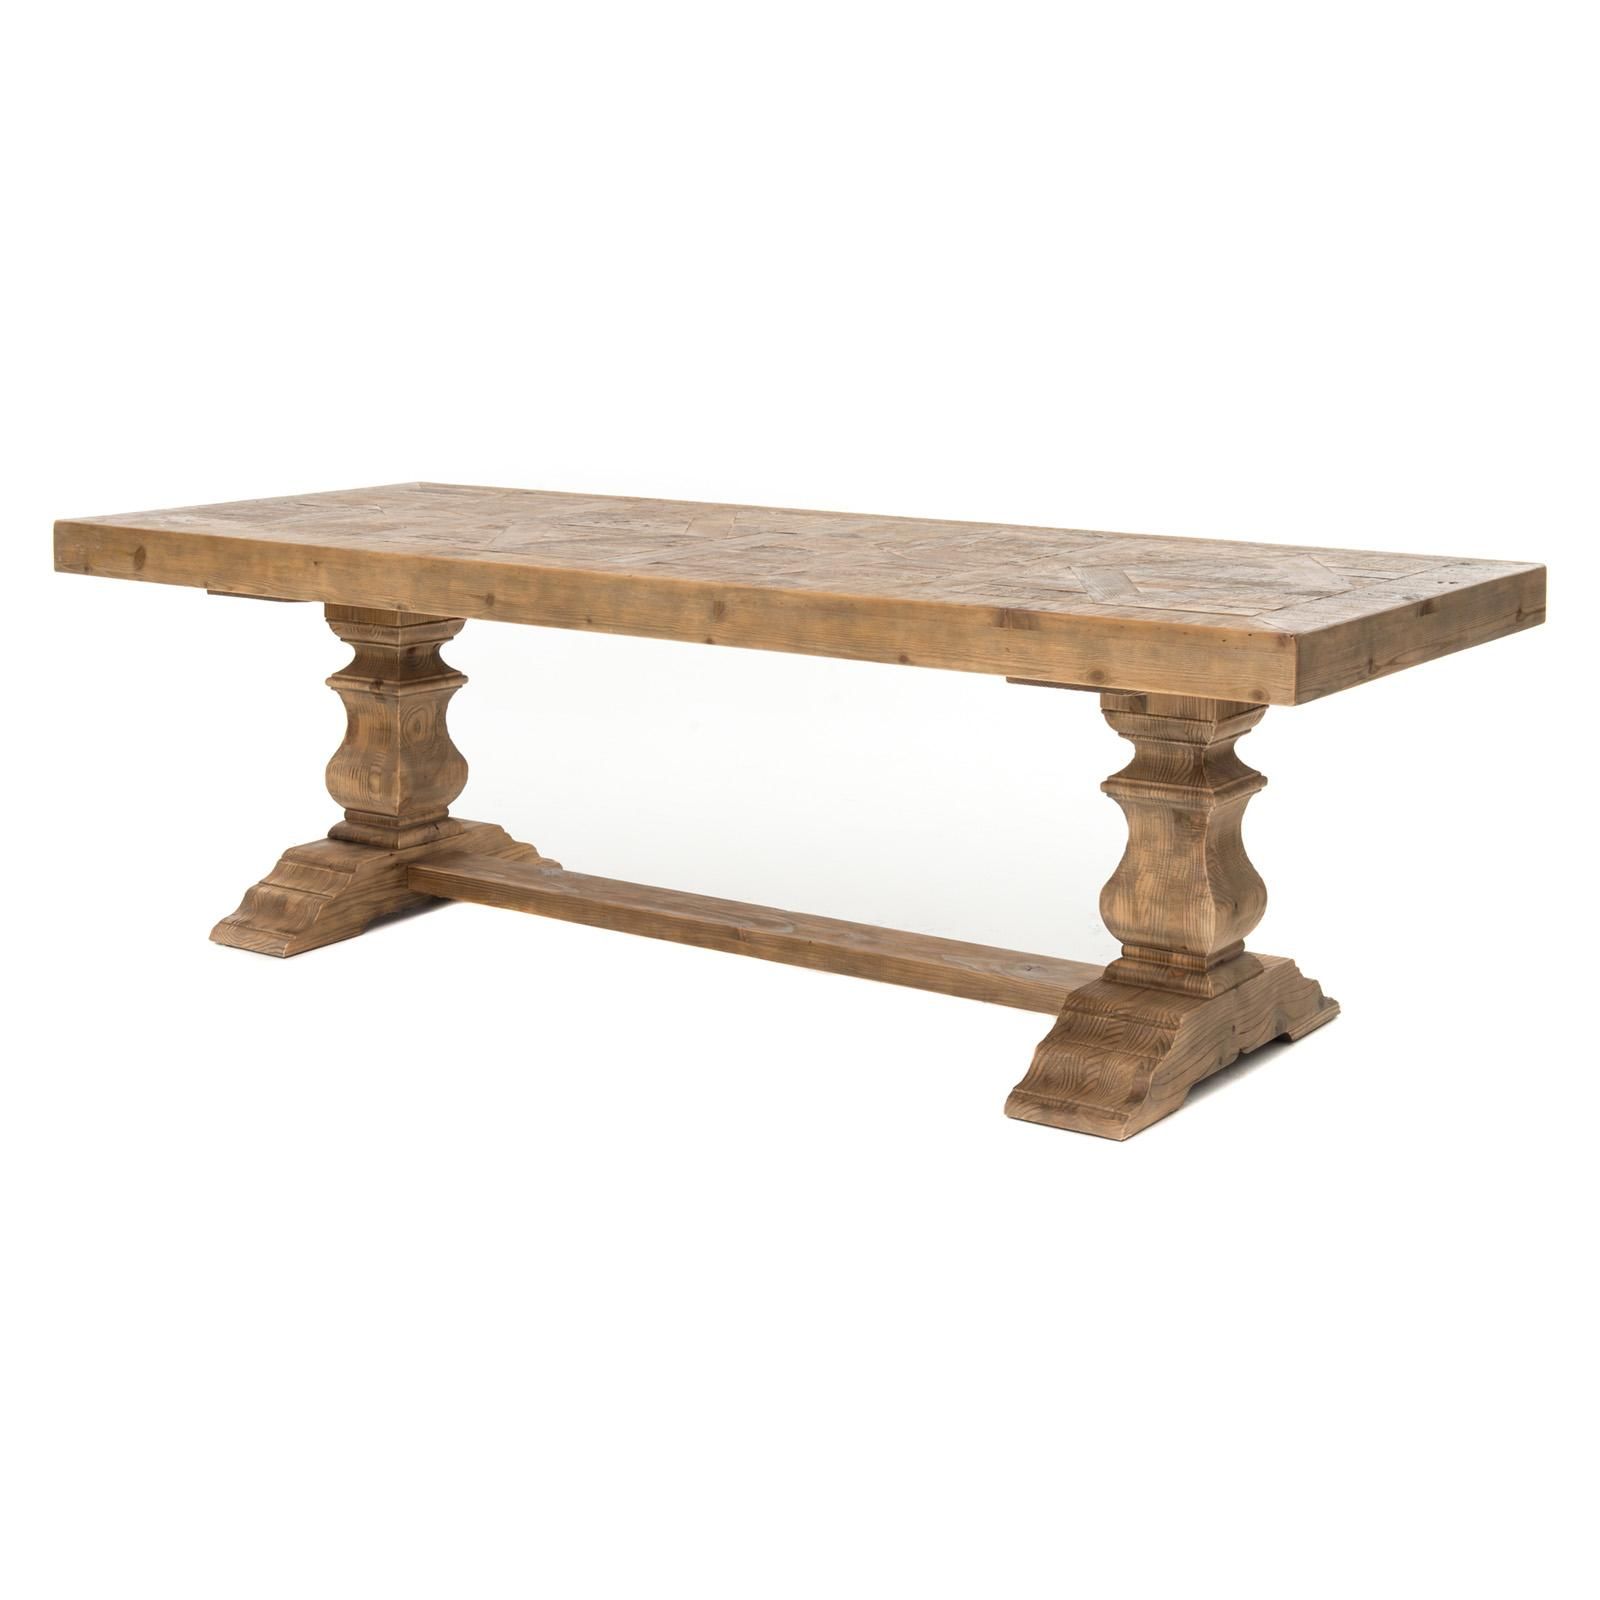 Four Hands Castle 98 in. Rectangular Dining Table | Hayneedle